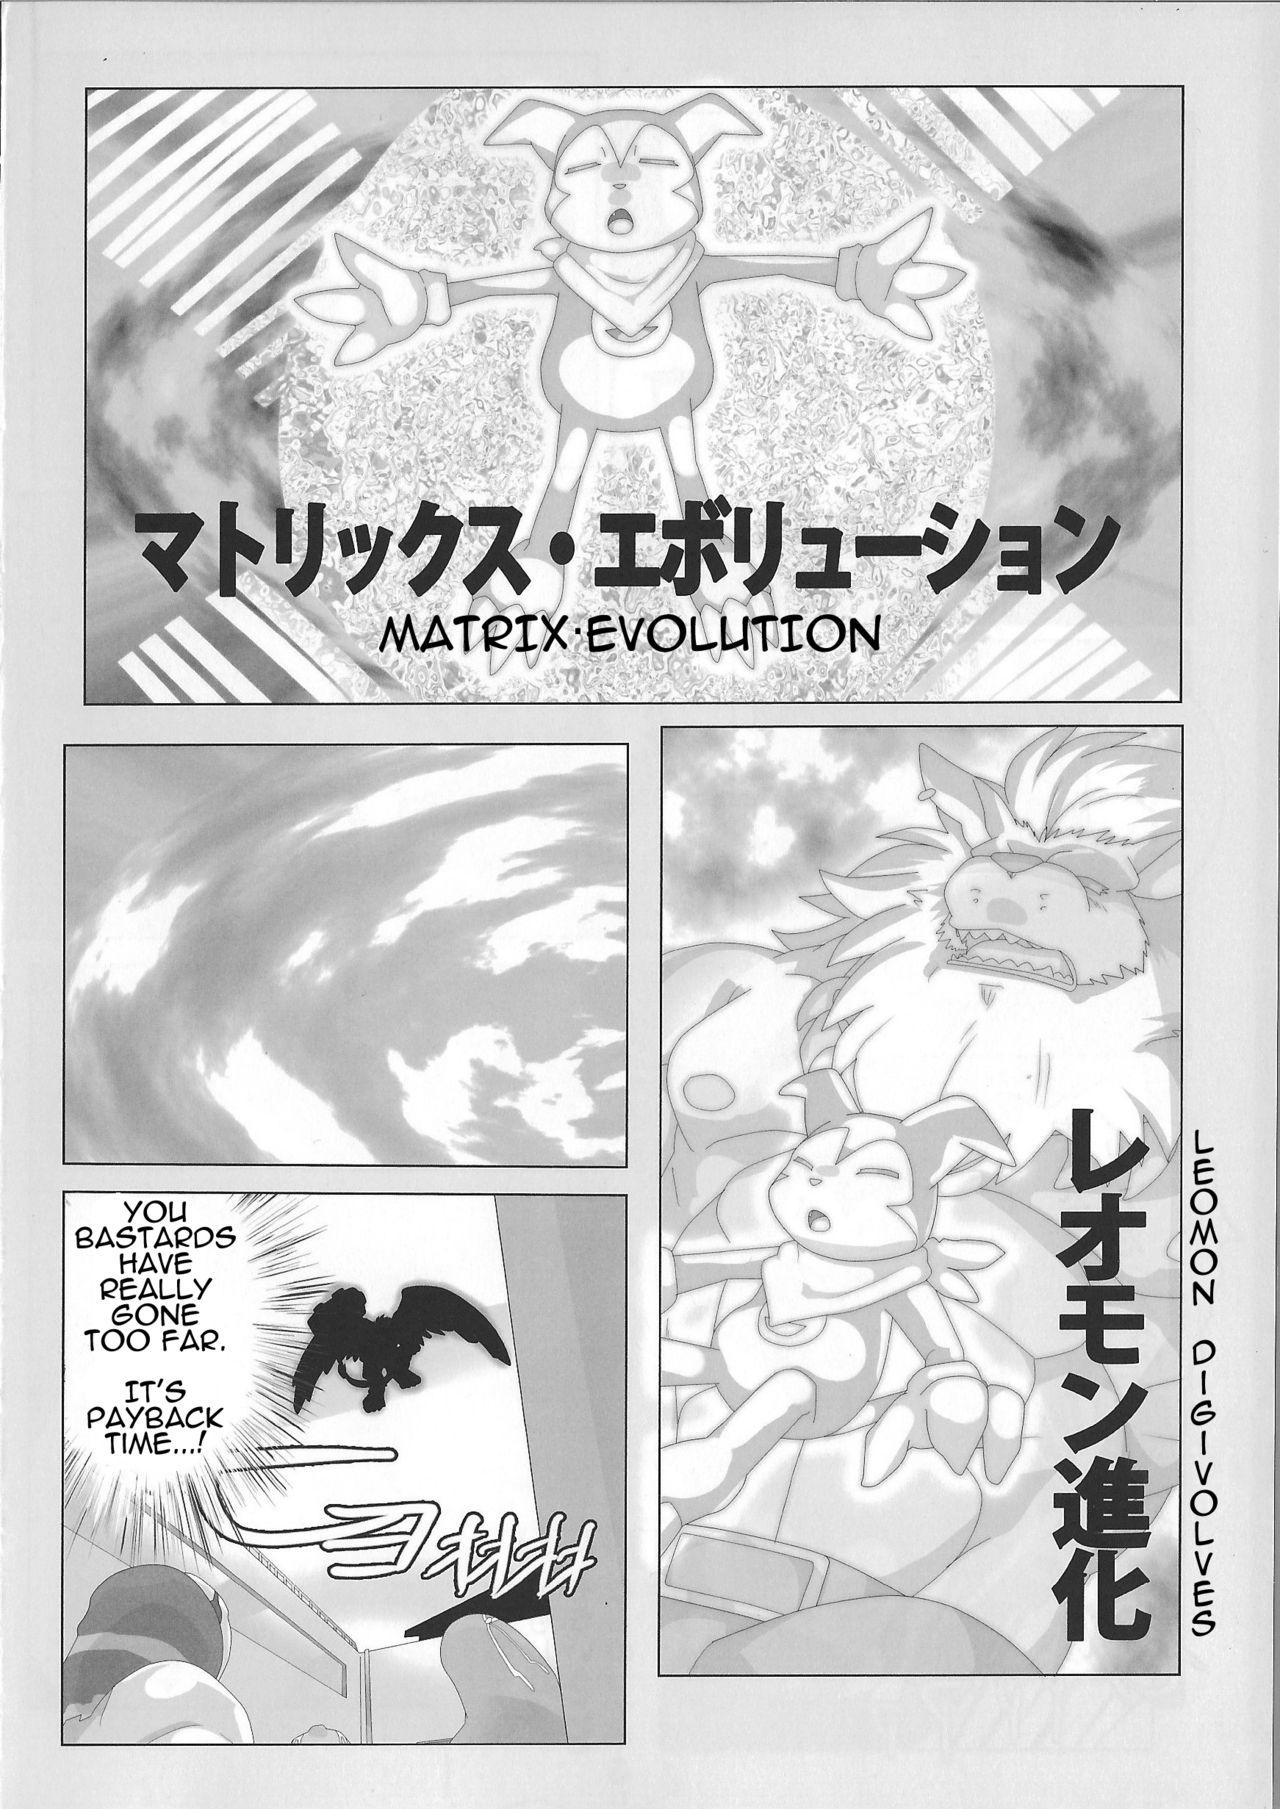 [Debirobu] For the Lion-Man Type Electric Life Form to Overturn Fate - Leomon Doujin [ENG] 22